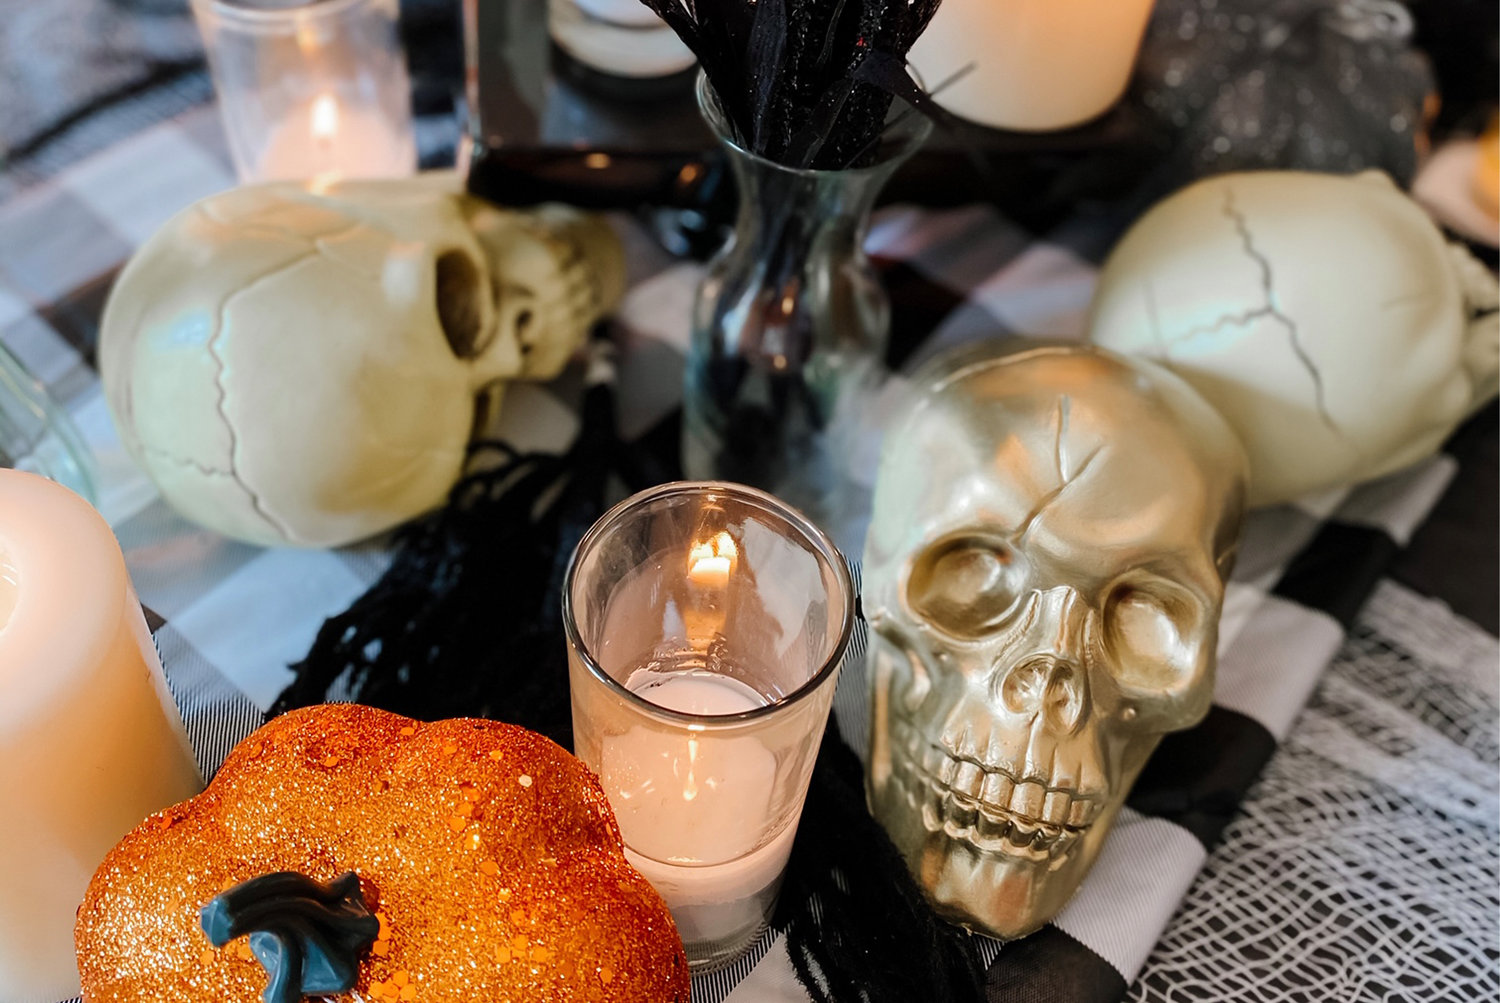 Candles are always a must with Halloween – whether wax or battery operated.